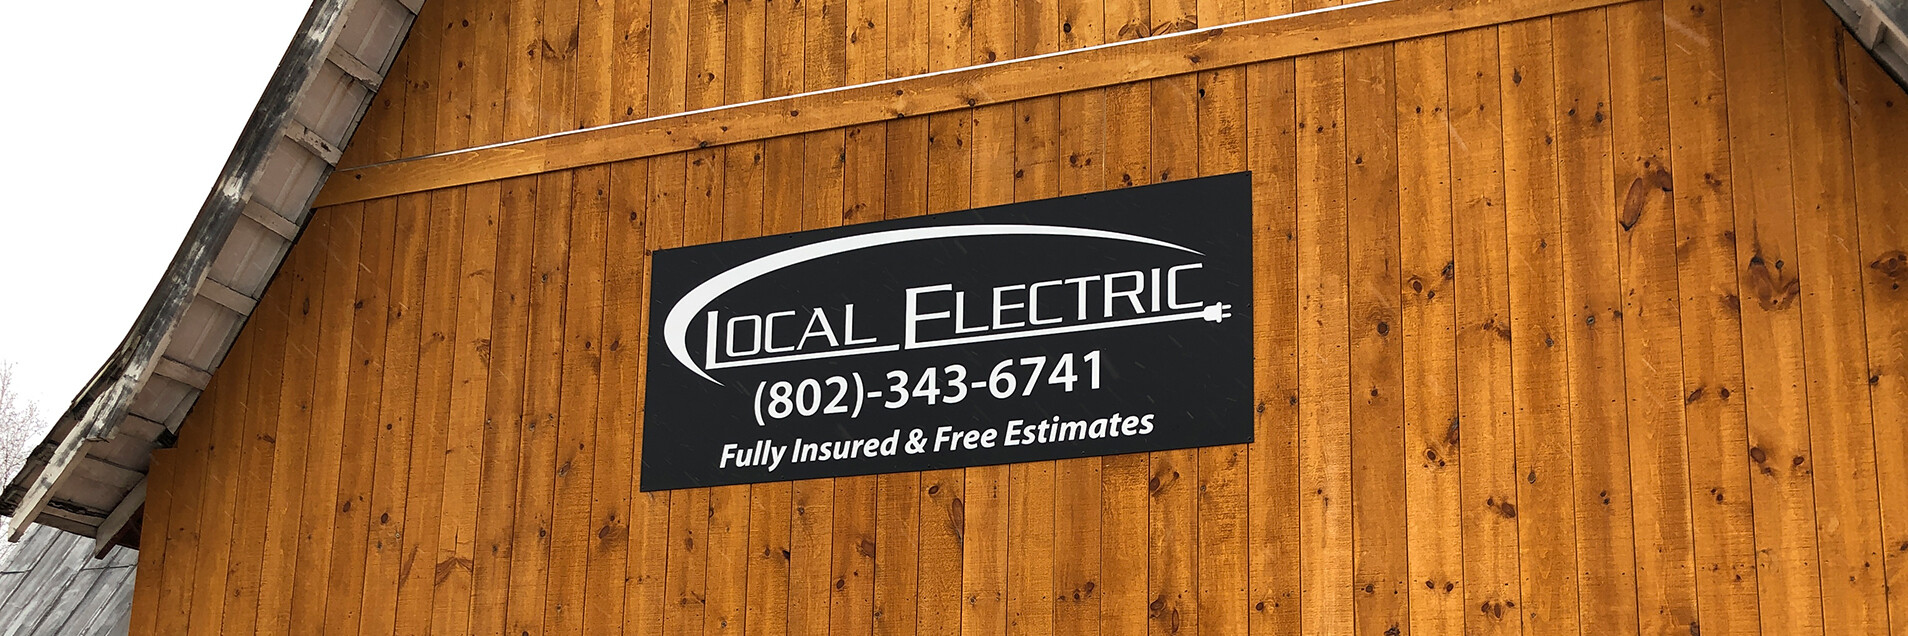 local electric large sign on wooden wall outdoors